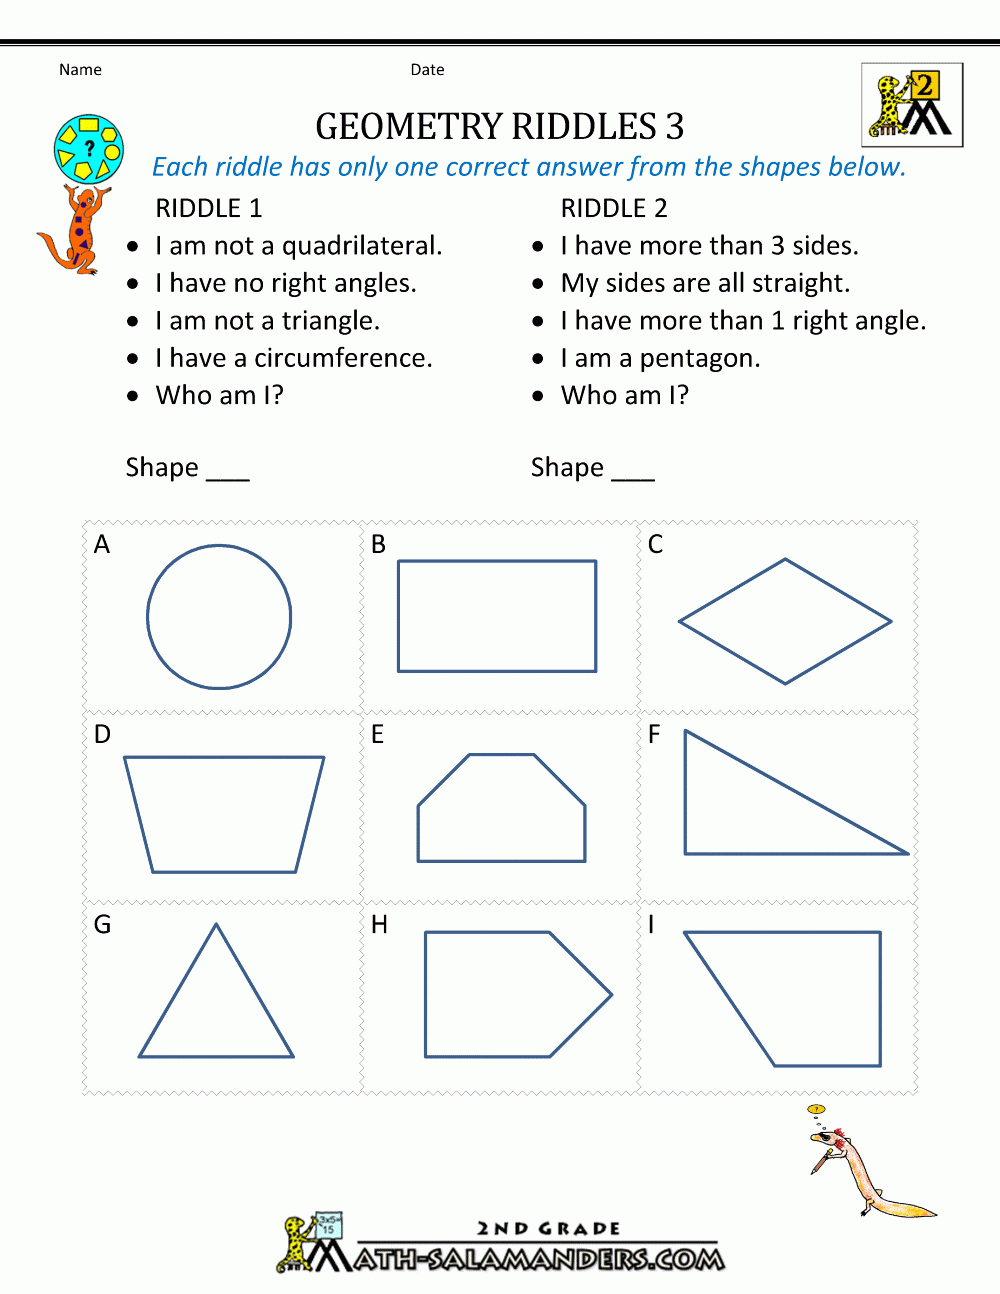 Free Geometry Worksheets 2Nd Grade Geometry Riddles - Printable Geometry Puzzles